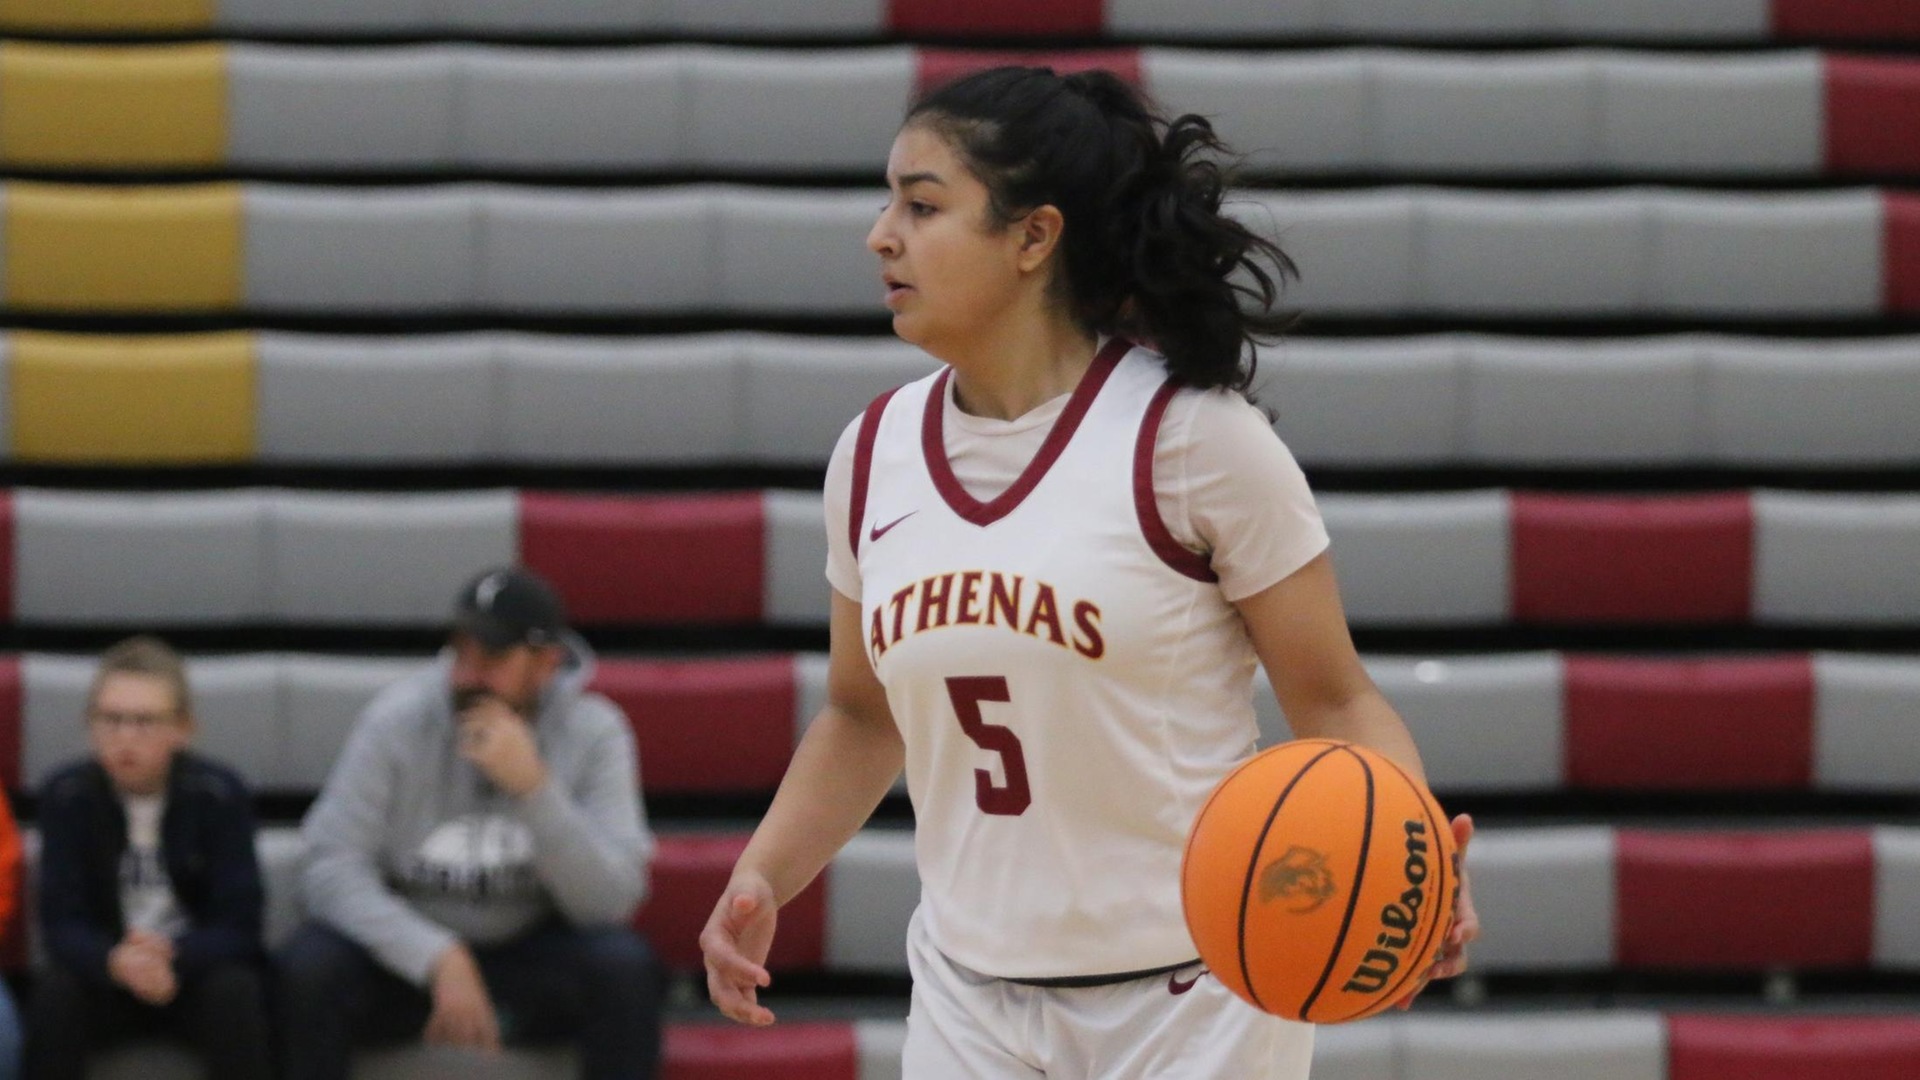 Tanya Ghai finished with 19 points for the Athenas